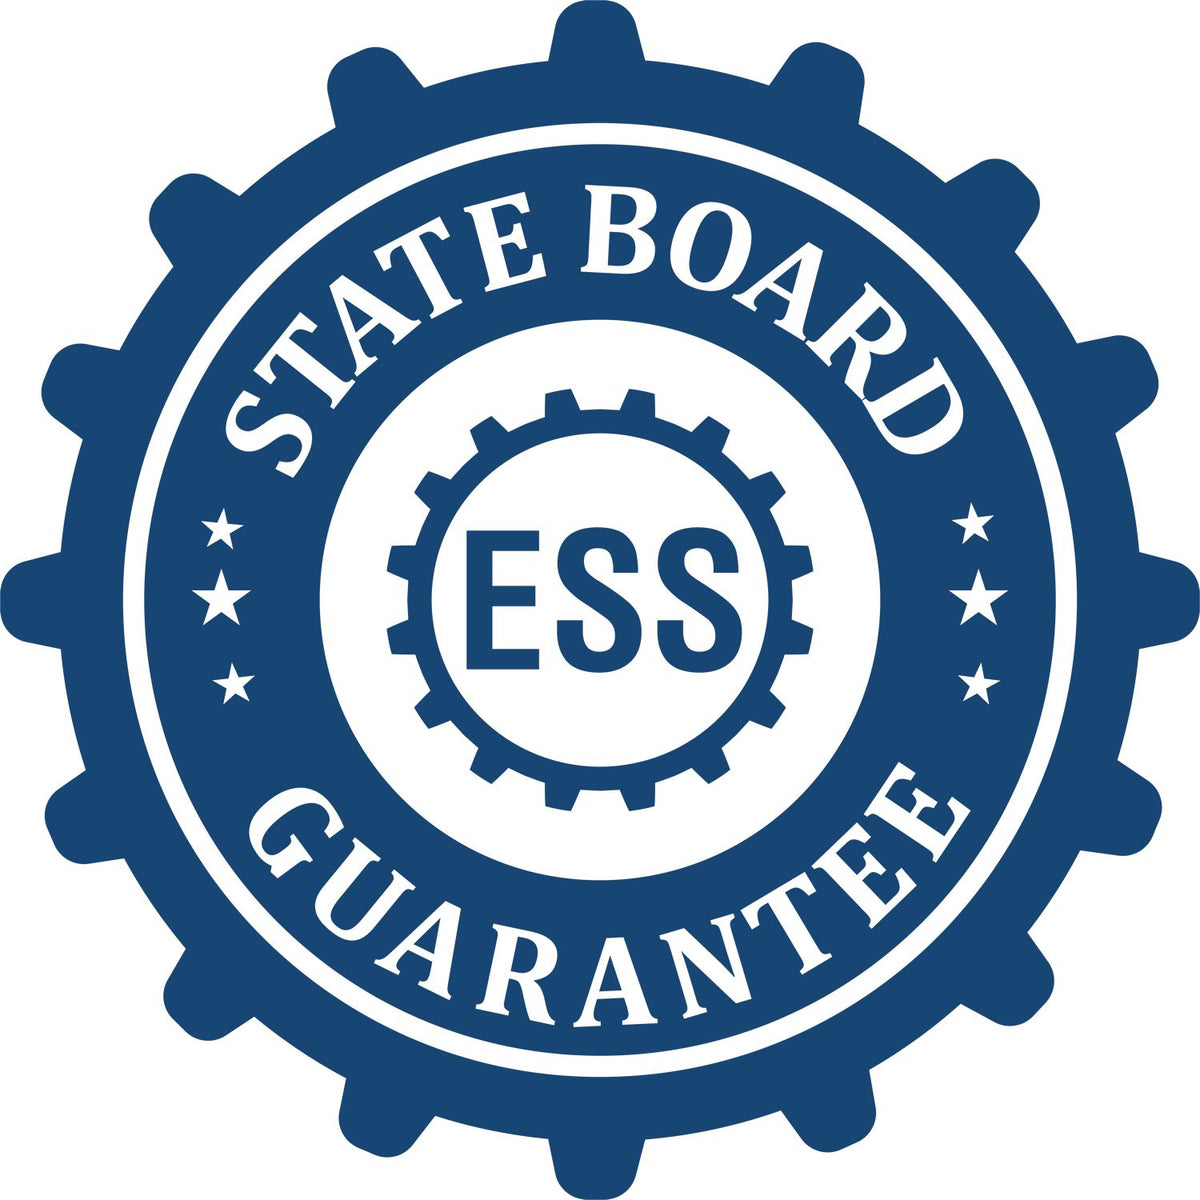 An emblem in a gear shape illustrating a state board guarantee for the Premium MaxLight Pre-Inked Ohio Engineering Stamp product.